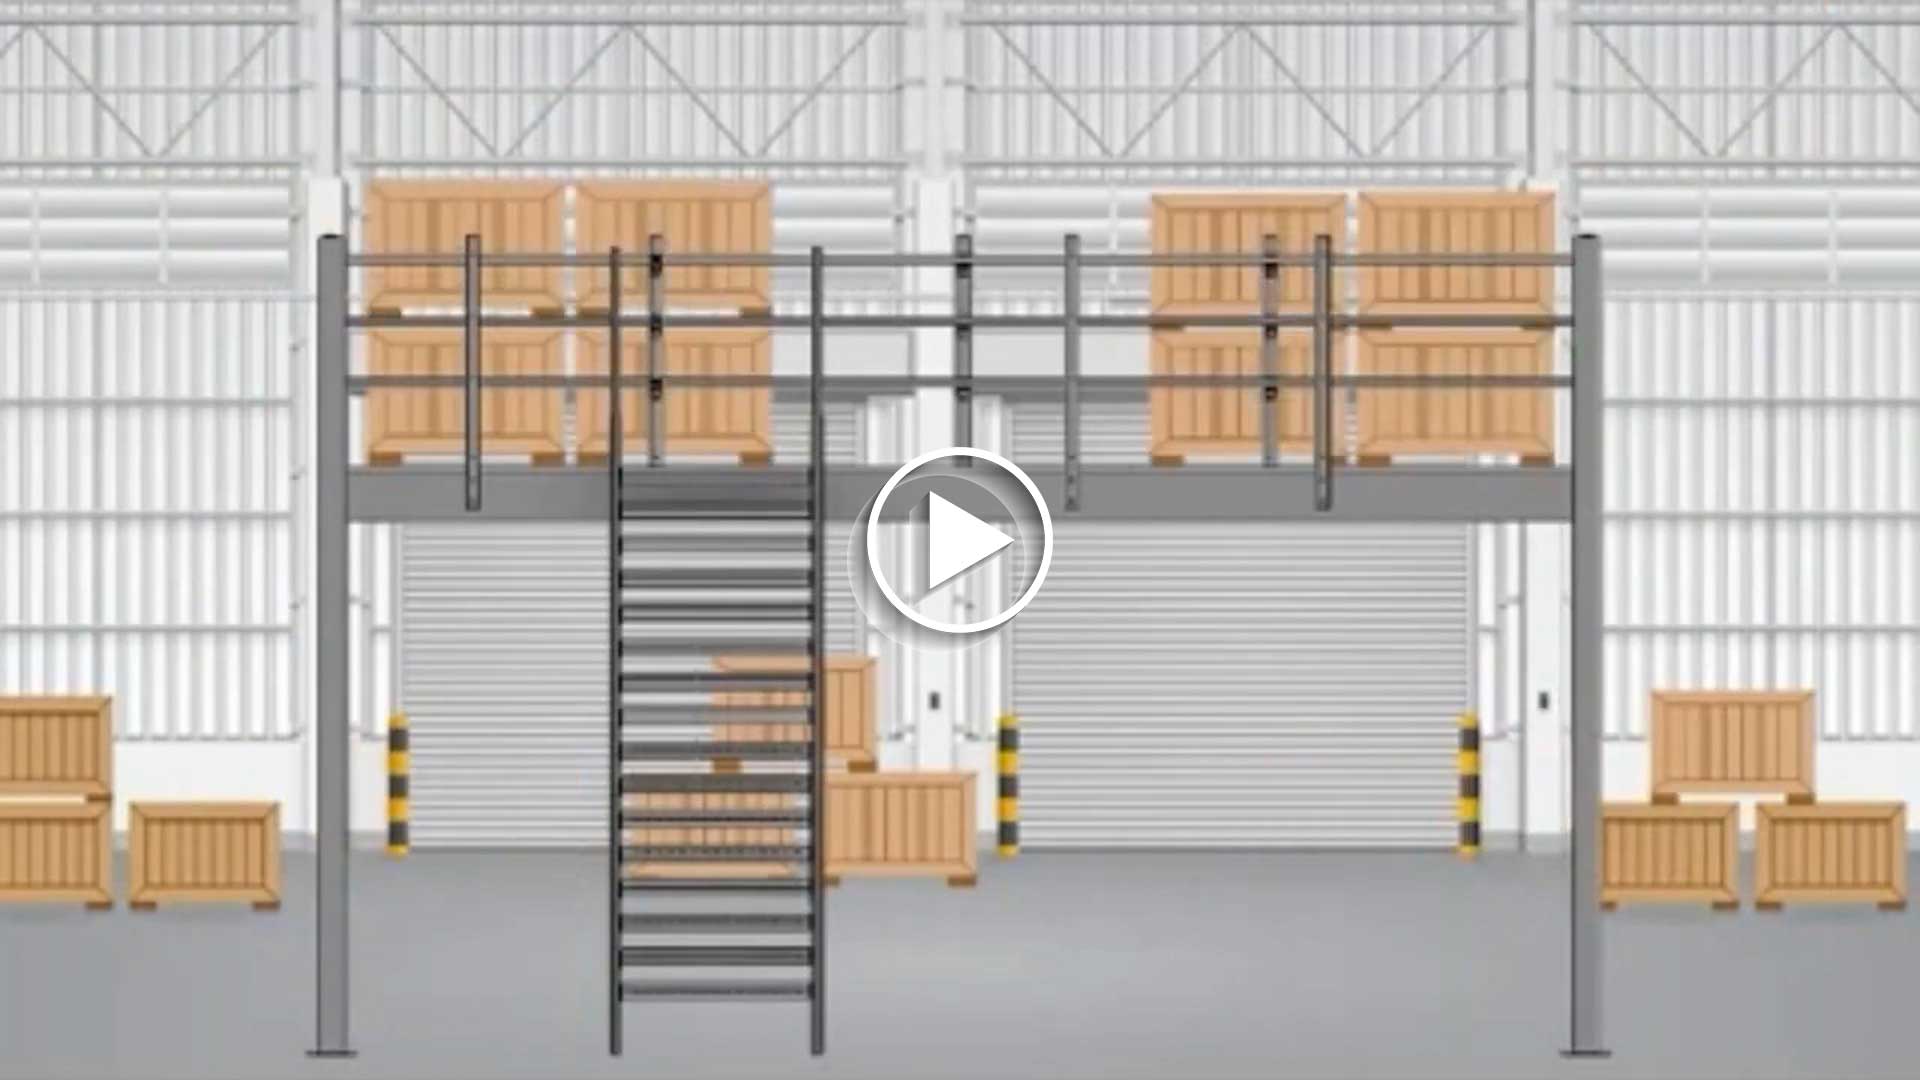 Double your Storage Space with Mezzanines